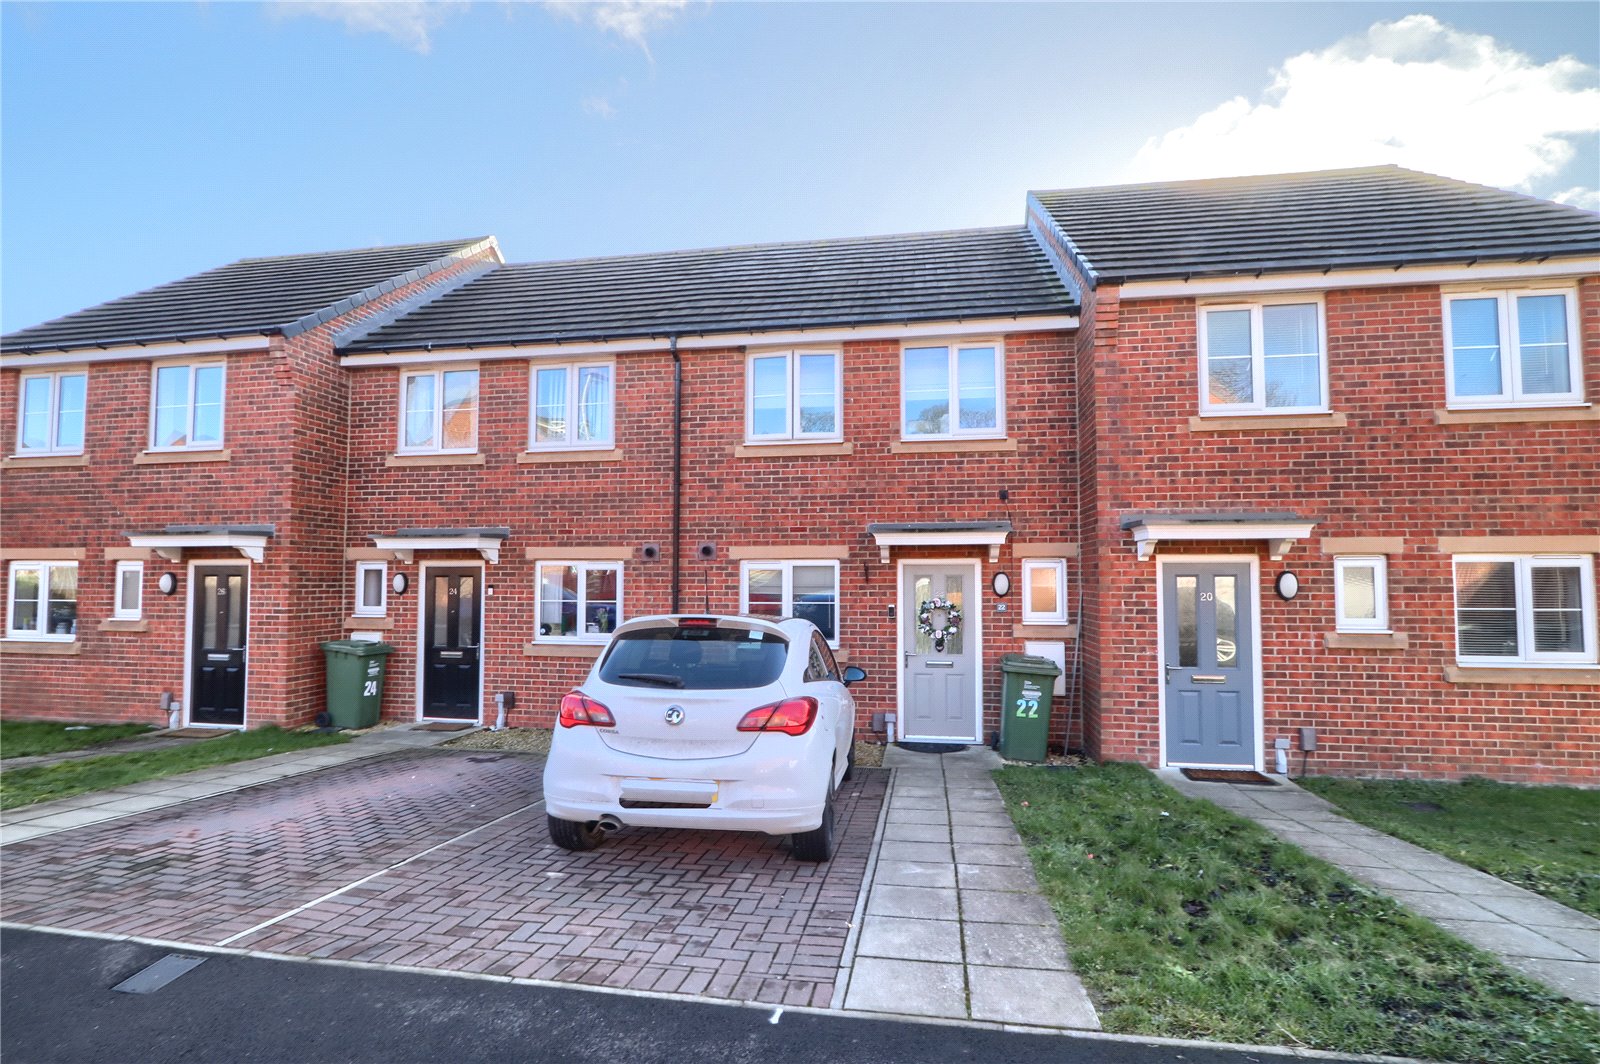 2 bed house for sale in Kingfisher Avenue, Norton - Property Image 1